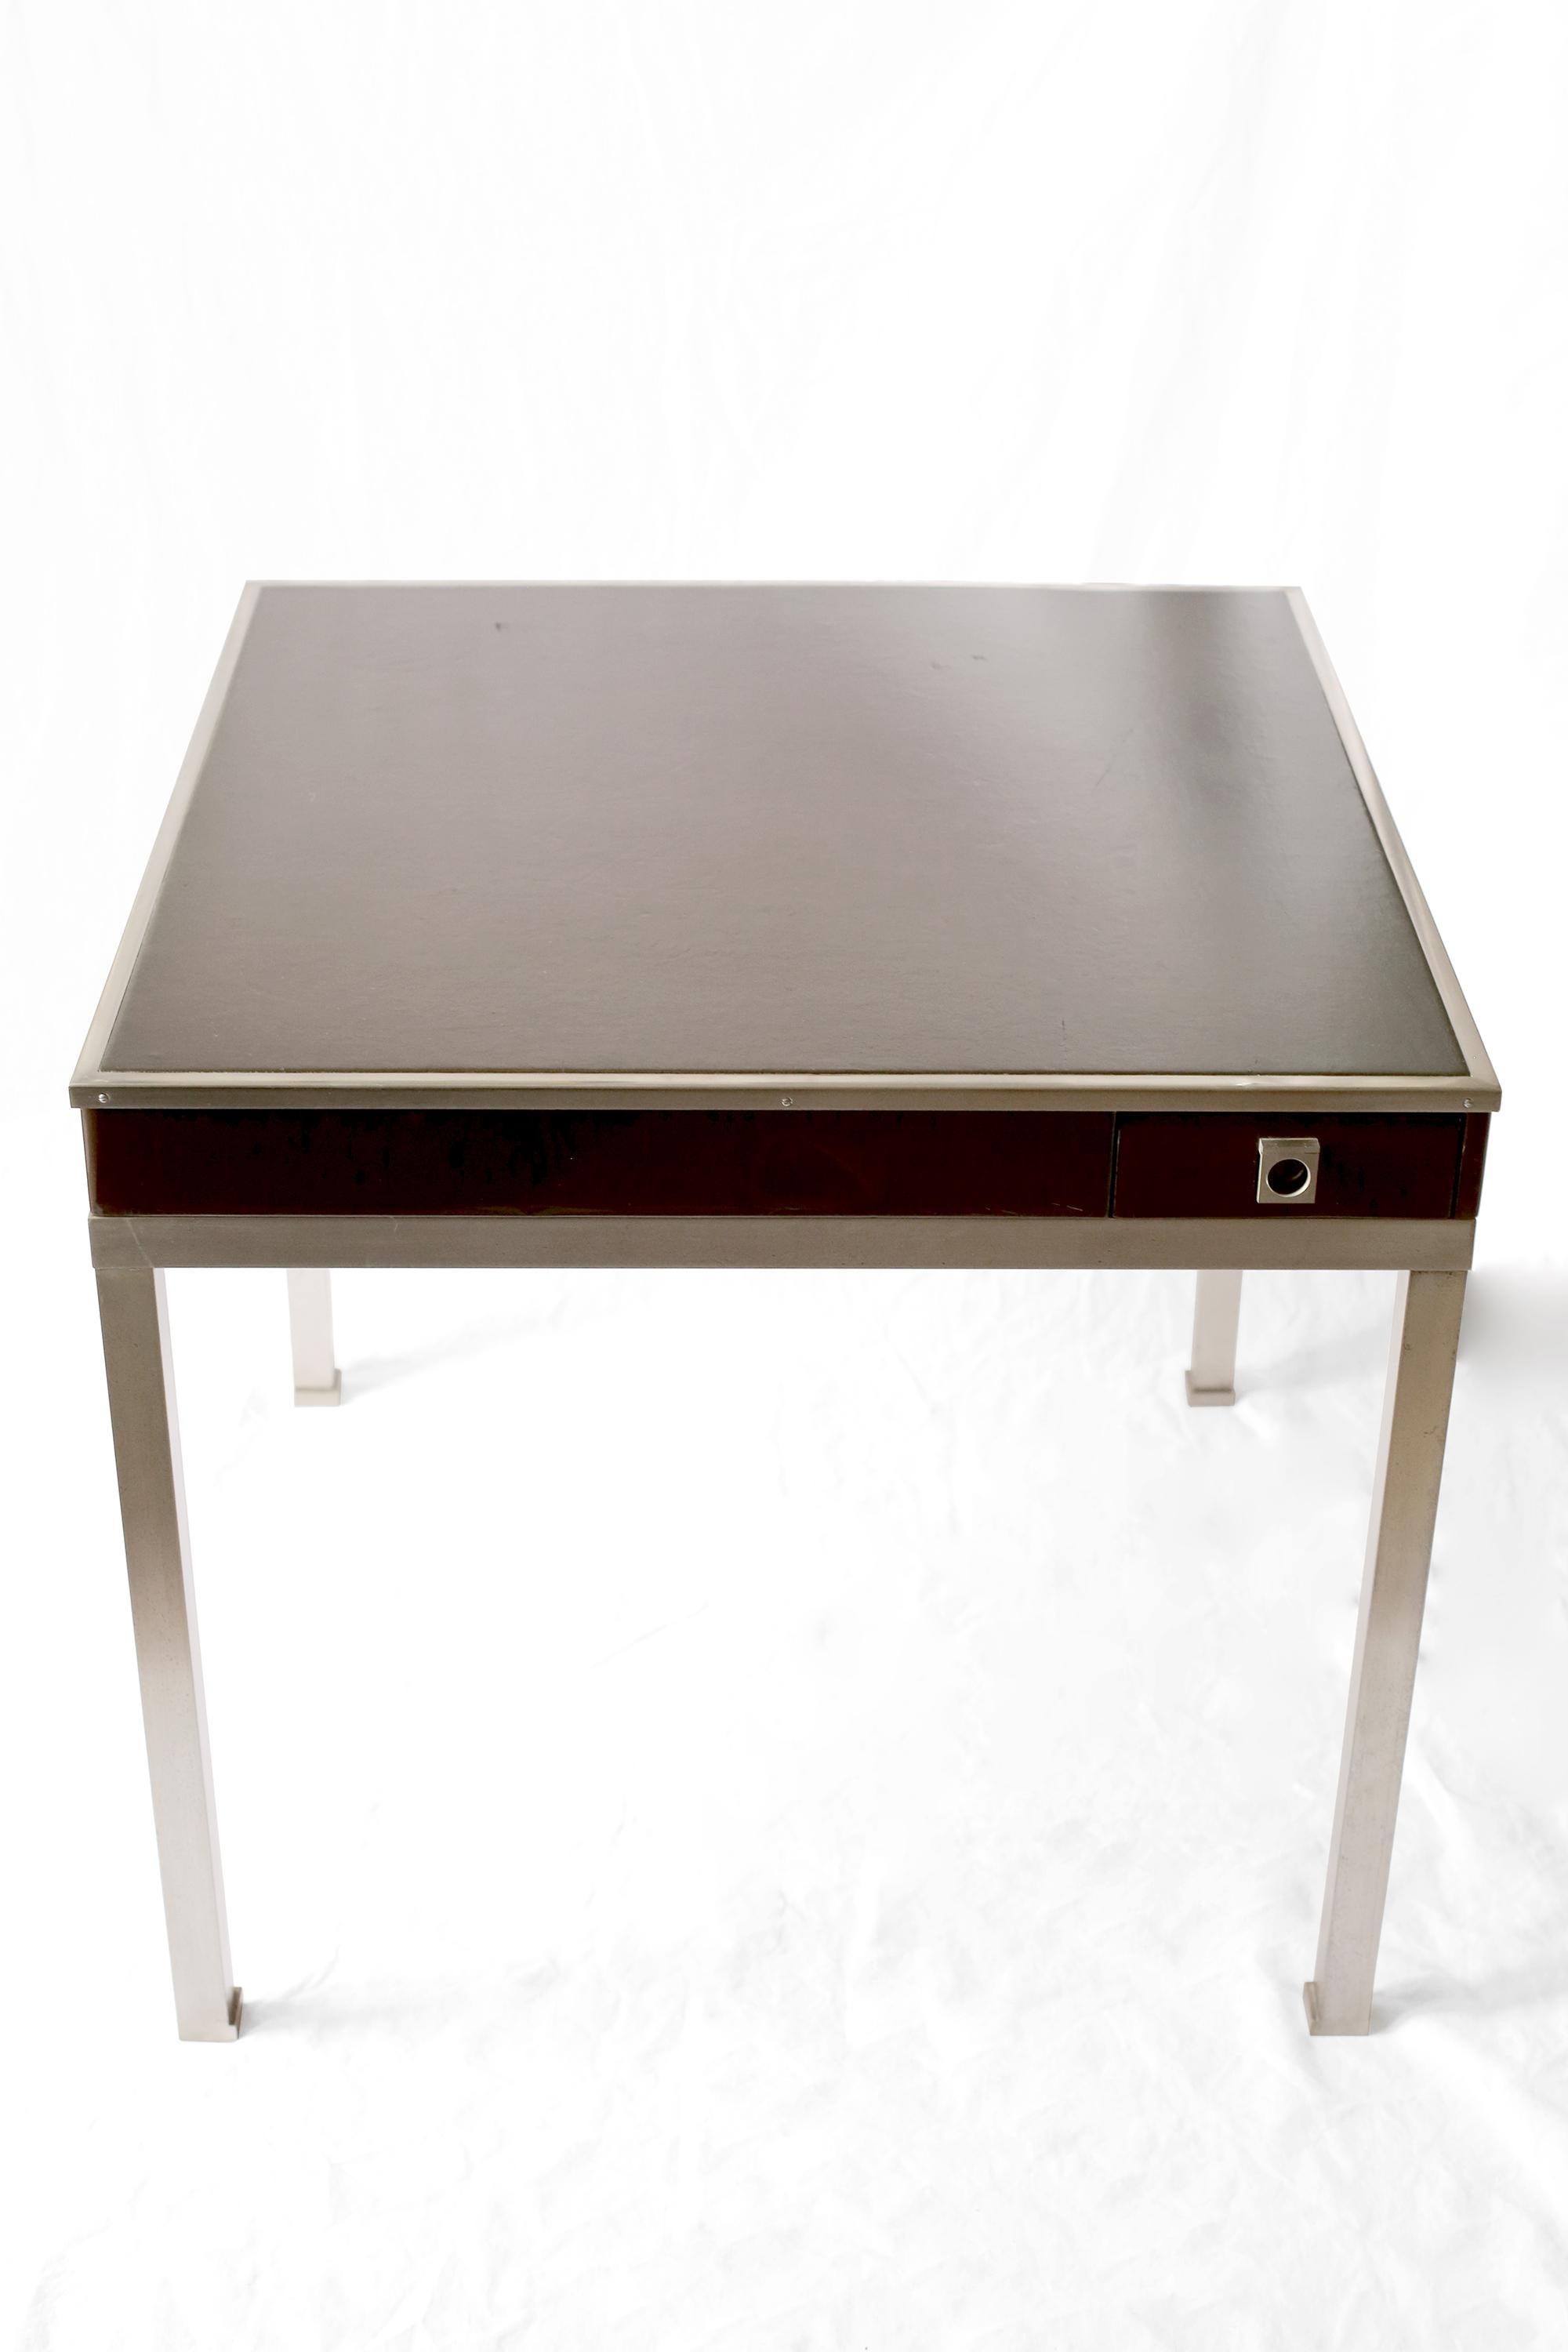 Brushed steel, chocolate brown lacquer and leather topped games table by Guy Lefevre for Maison Jansen. French, c. 1970s.